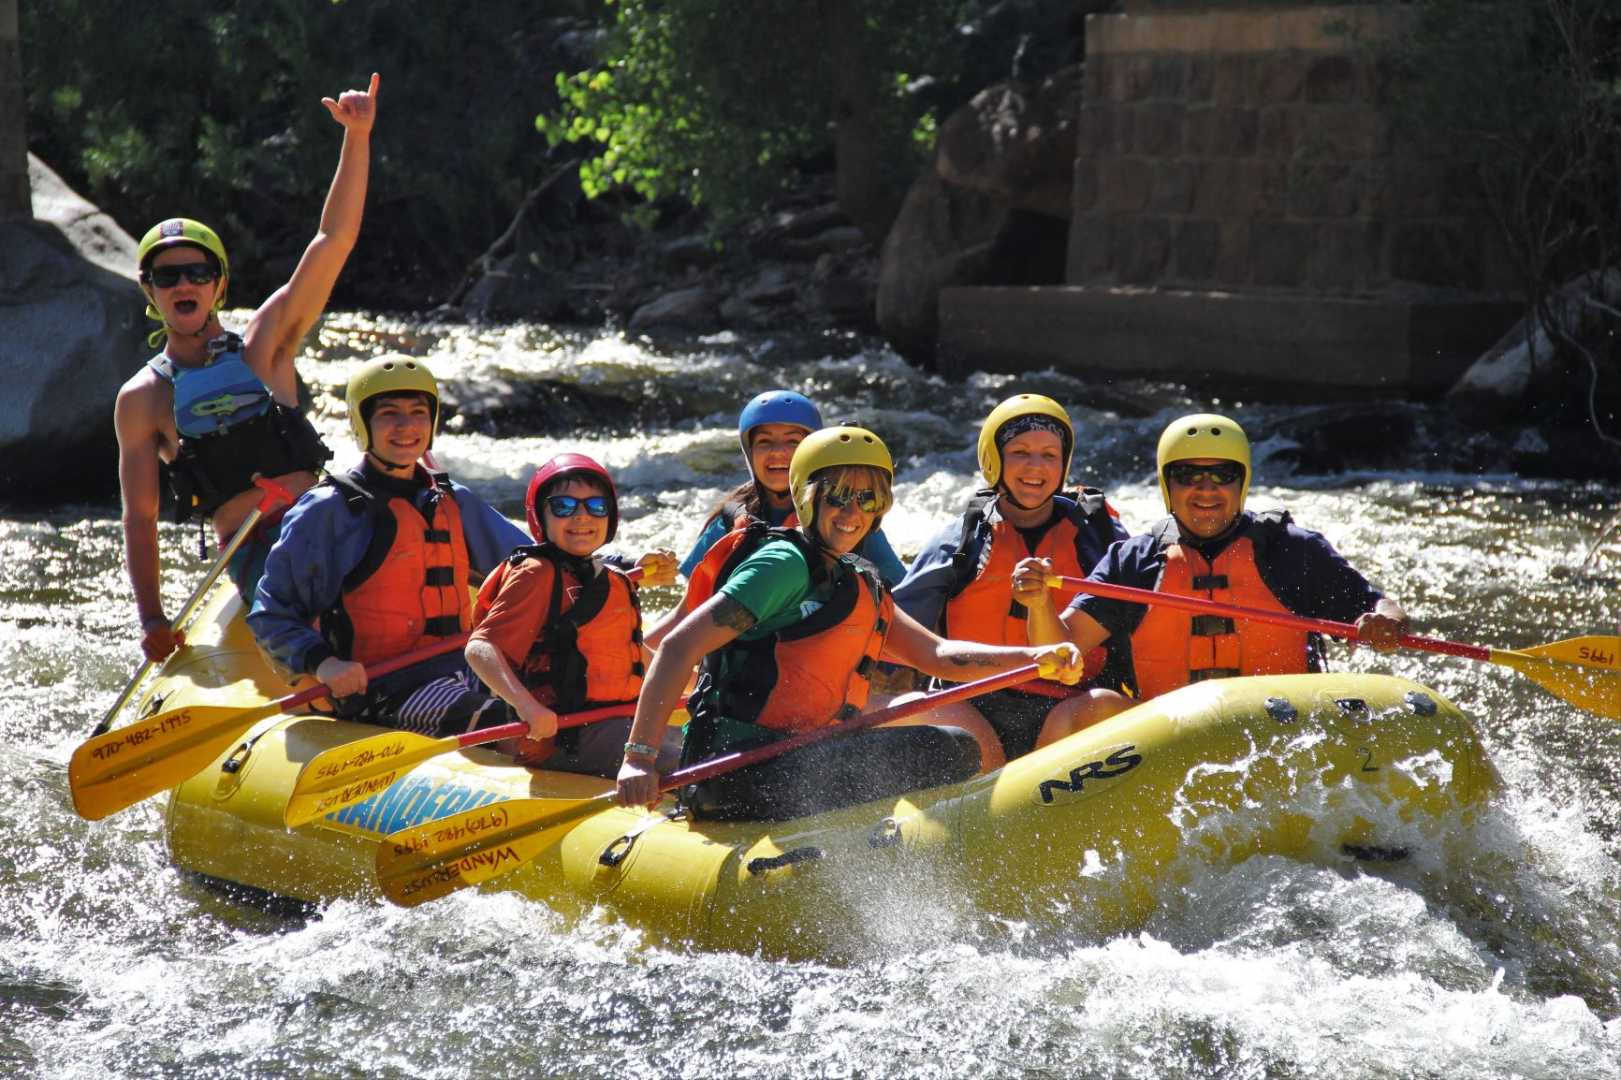 Whitewater rafting near Rocky Mountain National Park